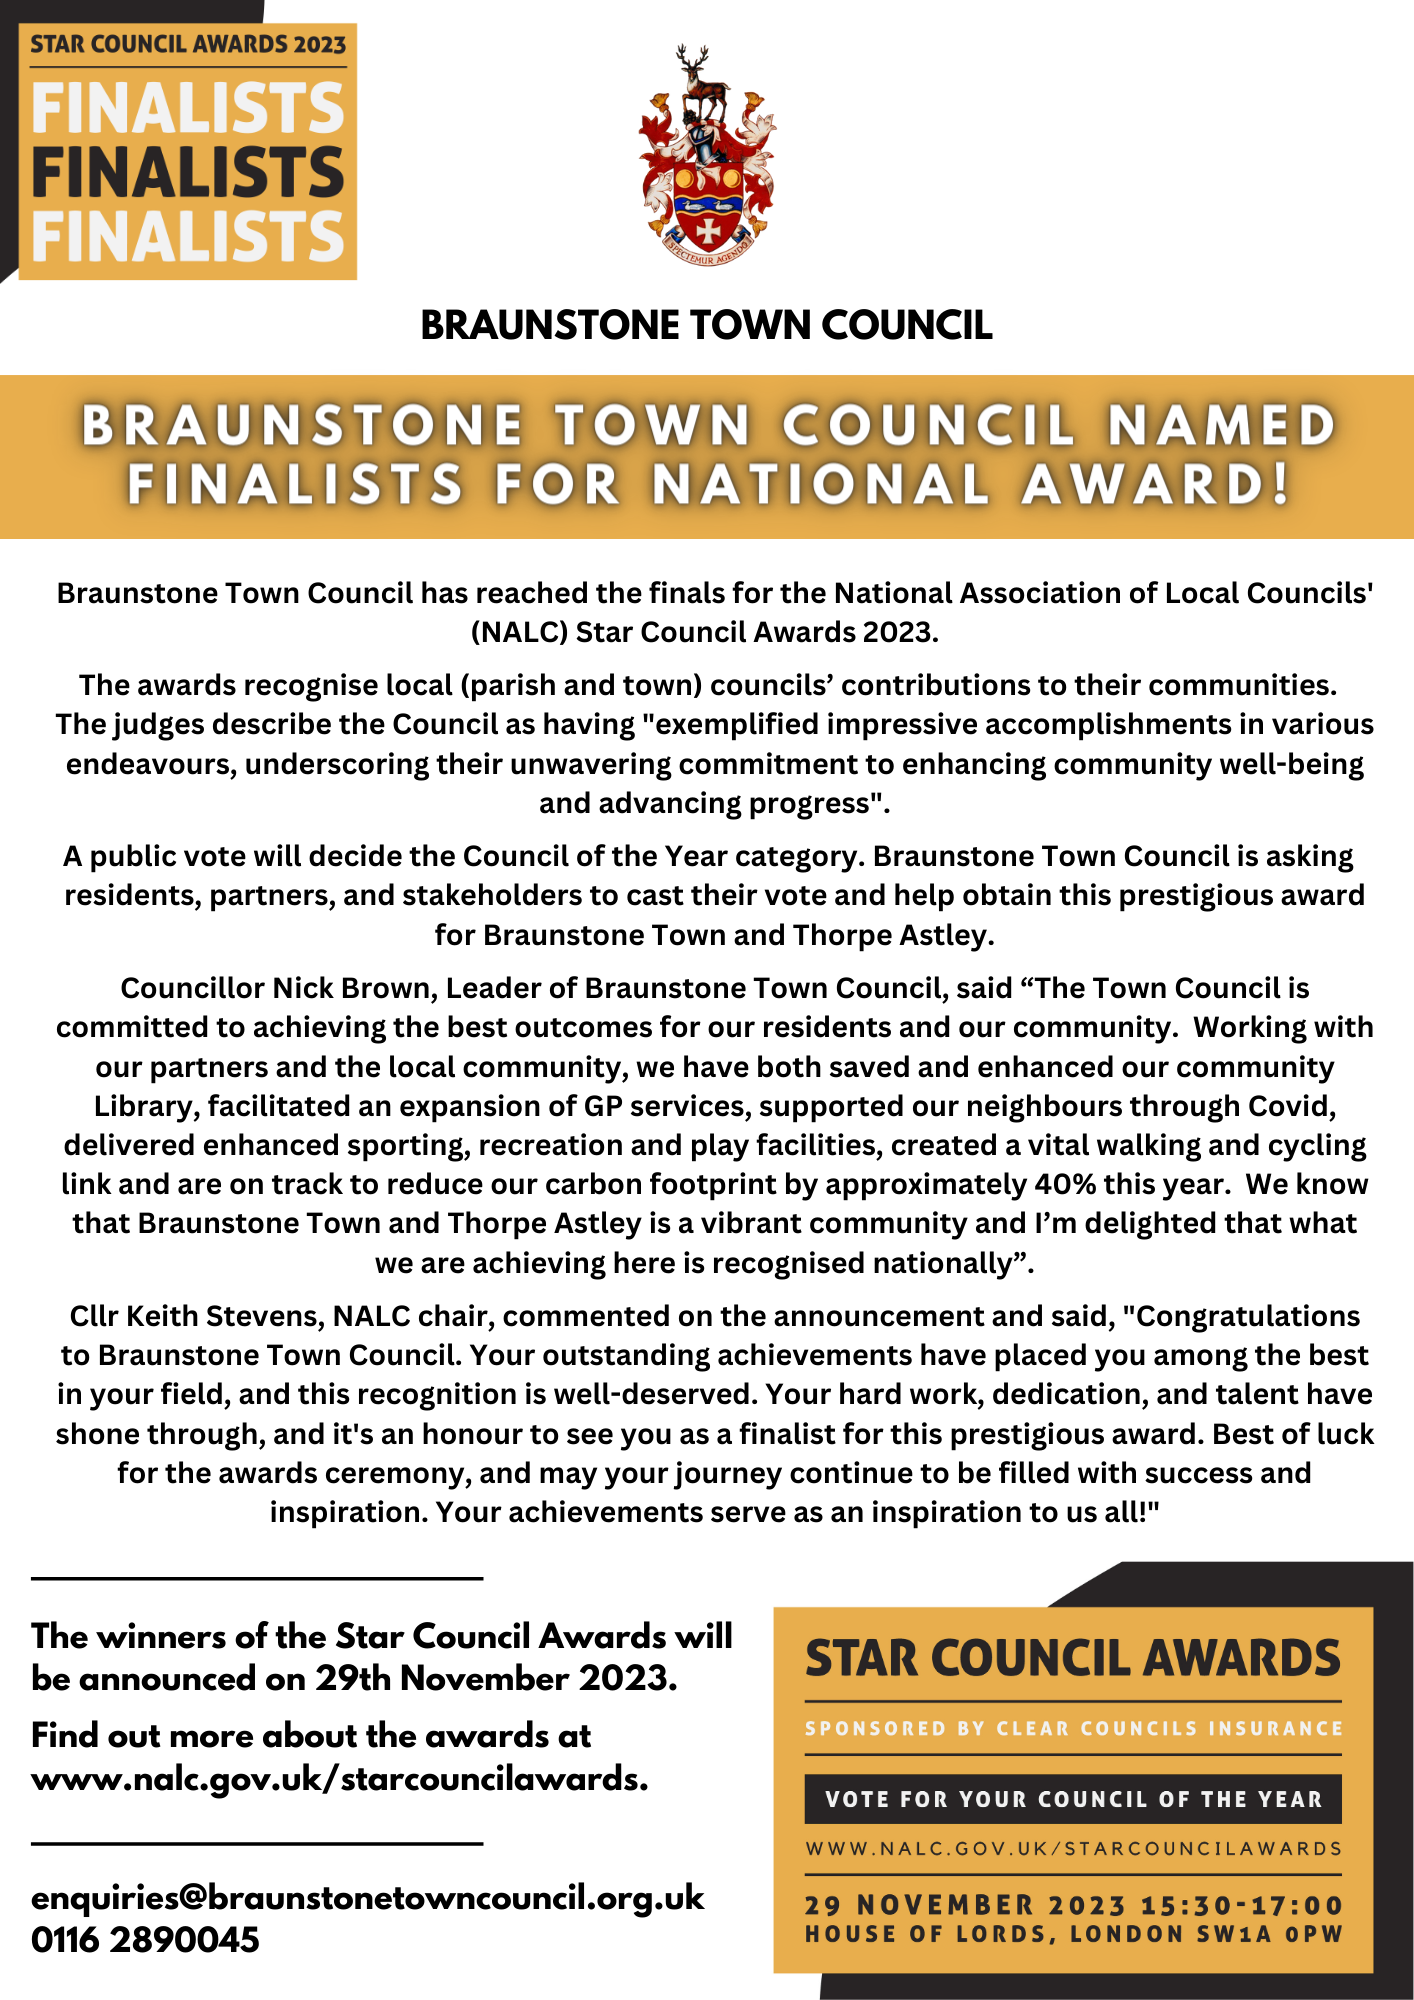 Braunstone Town Council named finalists for national award Braunstone Town Council has reached the finals for the National Association of Local Councils NALC Star Council Awards 2023. The award